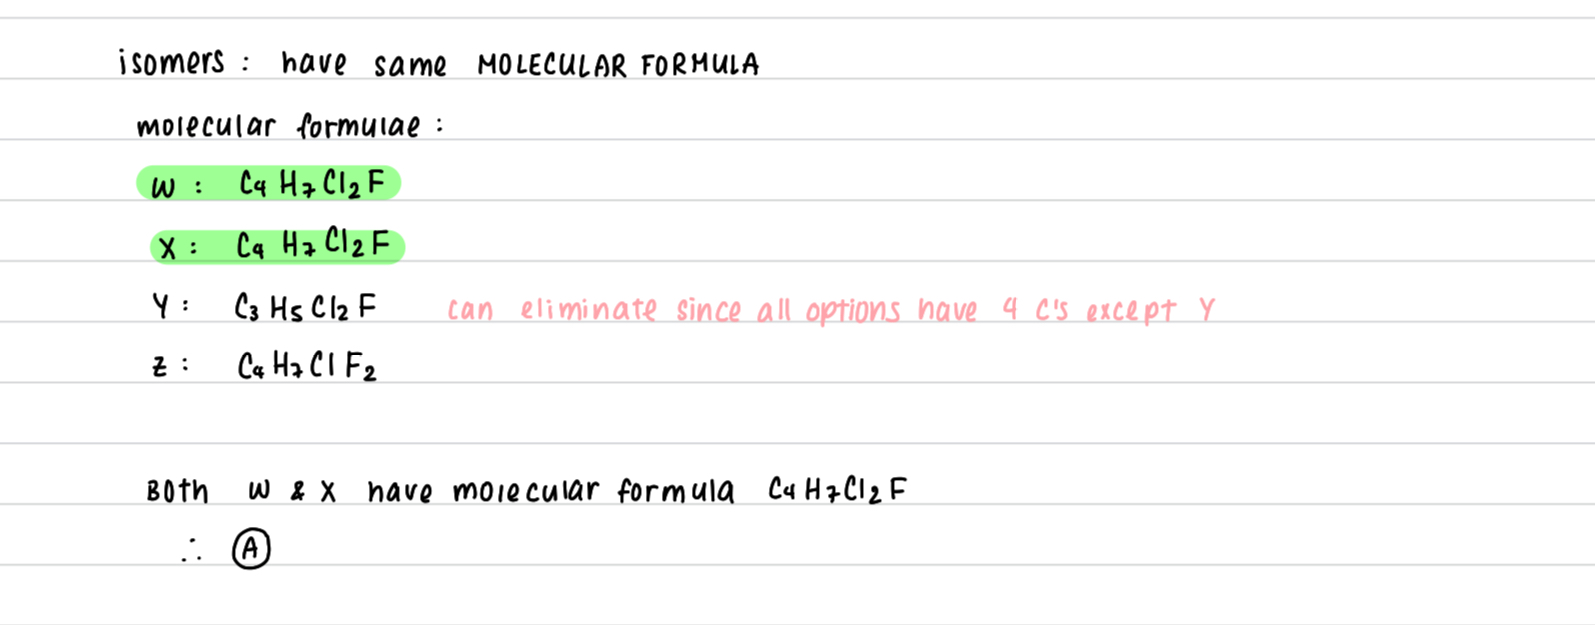 Solutions to HSC Chemistry 2014 Q9 